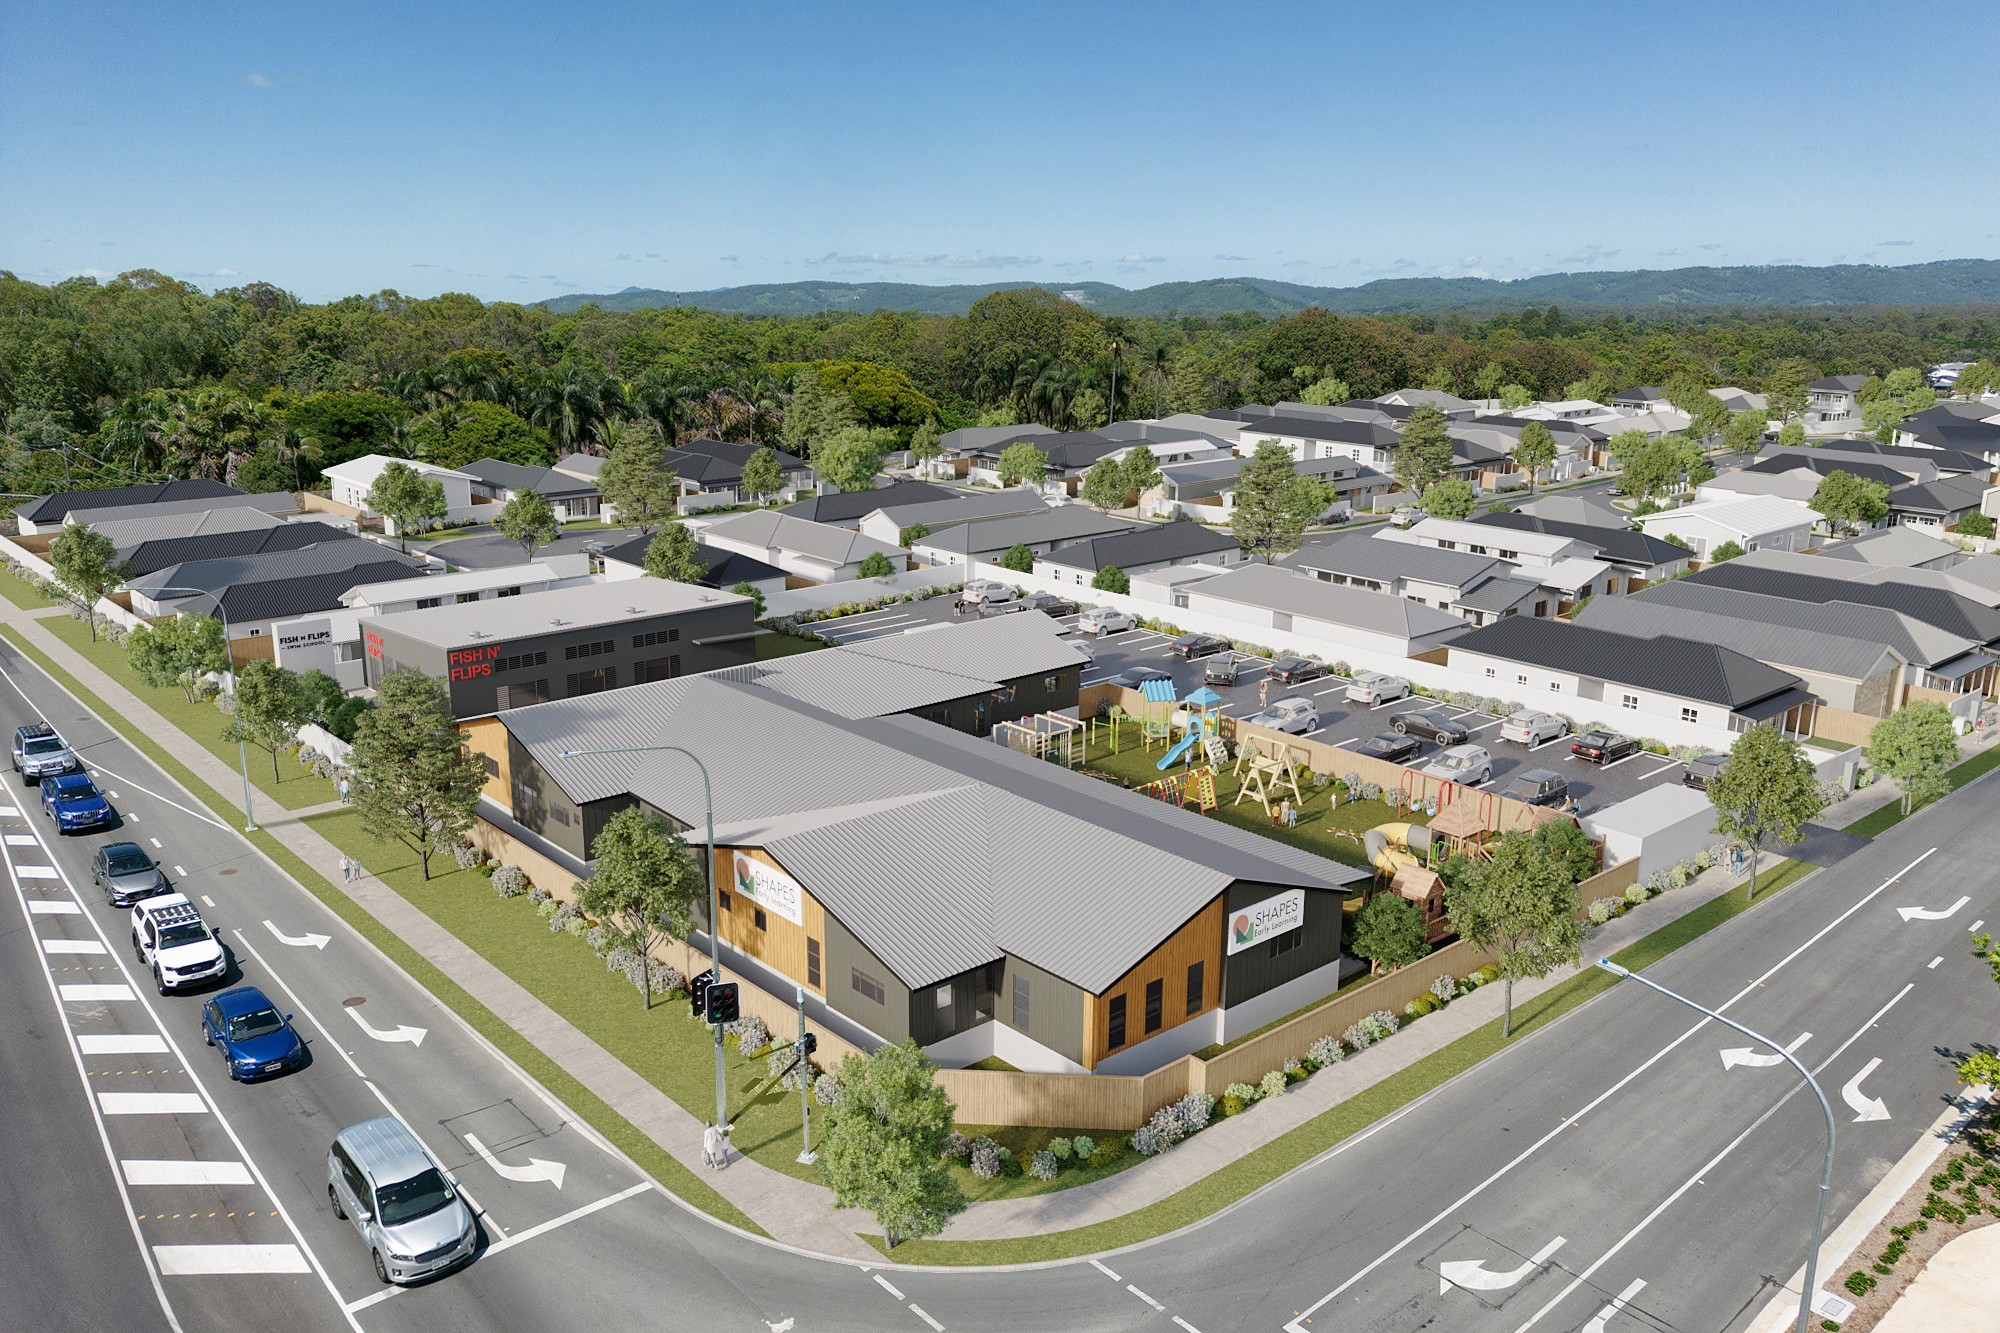 A new childcare place will open in Morayfield. Photo crcedit: Adpen.